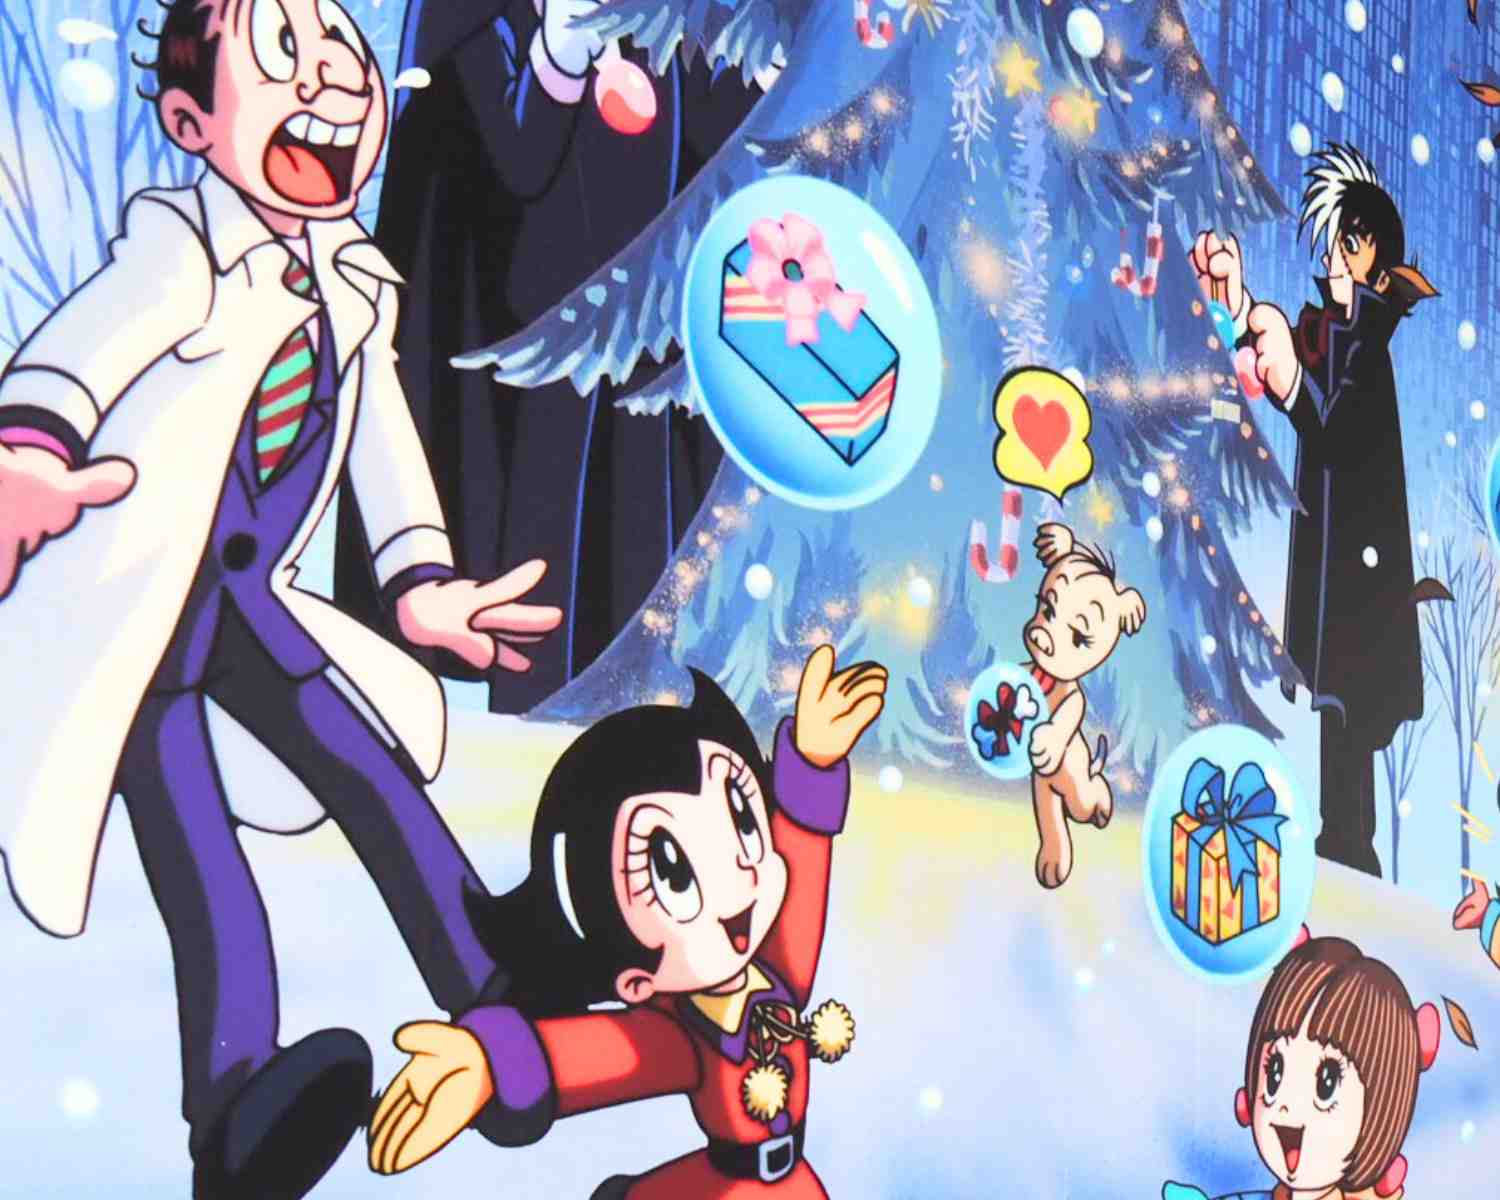 Uran is in this mural at Takadanobaba Japan. She is Astro Boy's sister